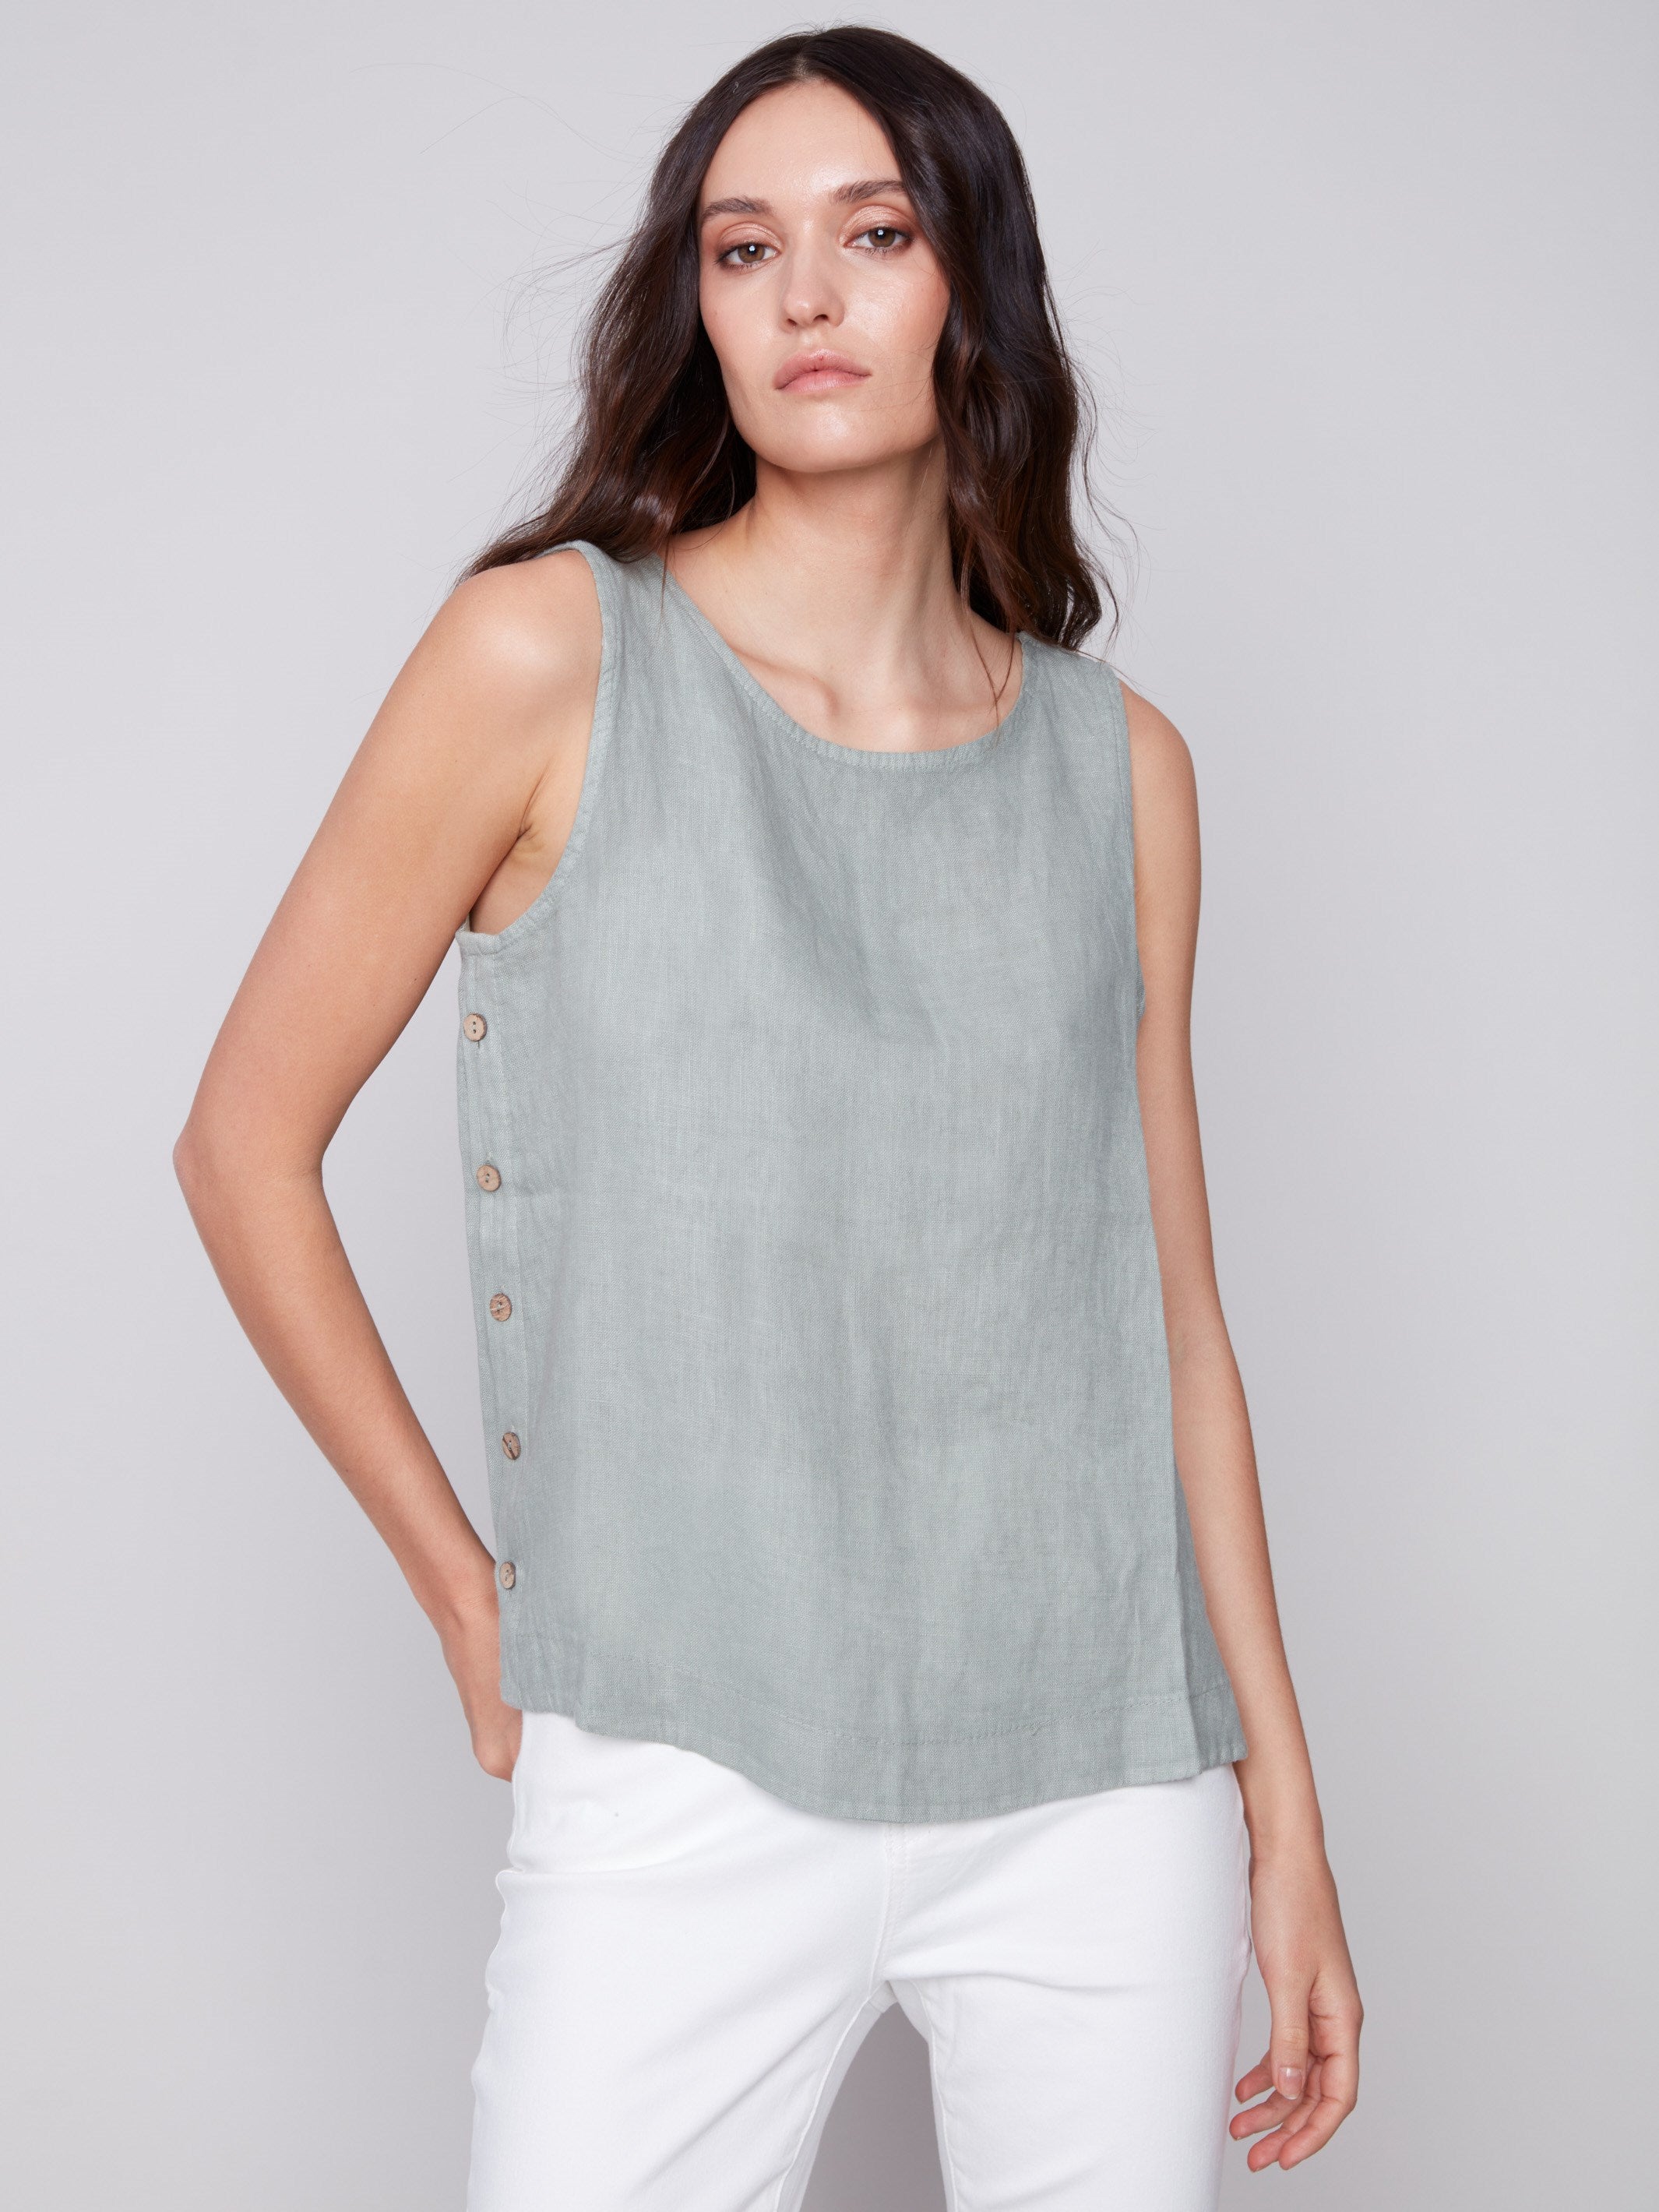 Sleeveless Linen Top with Side Buttons - Celadon - Charlie B Collection Canada - Image 1